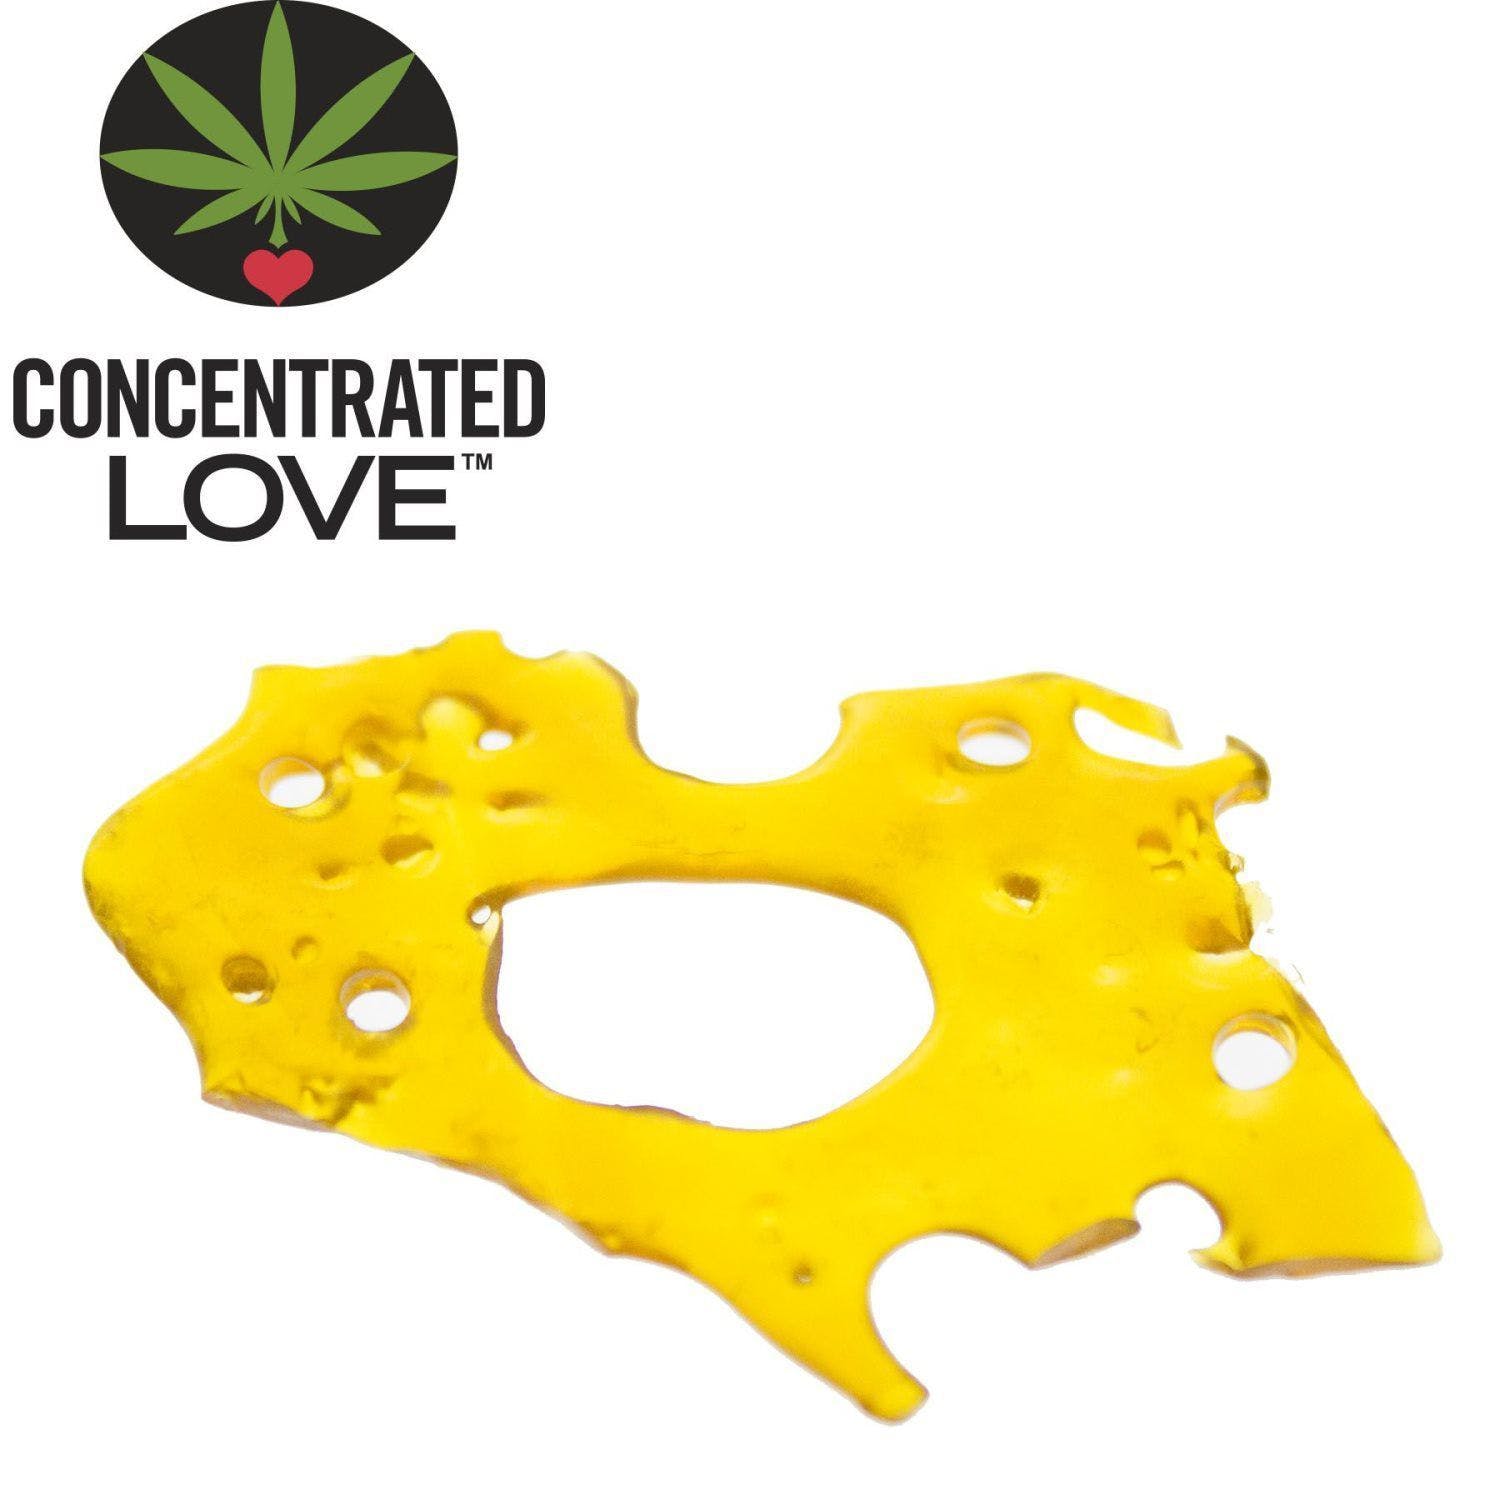 Concentrated Love - Shatter 1 gram